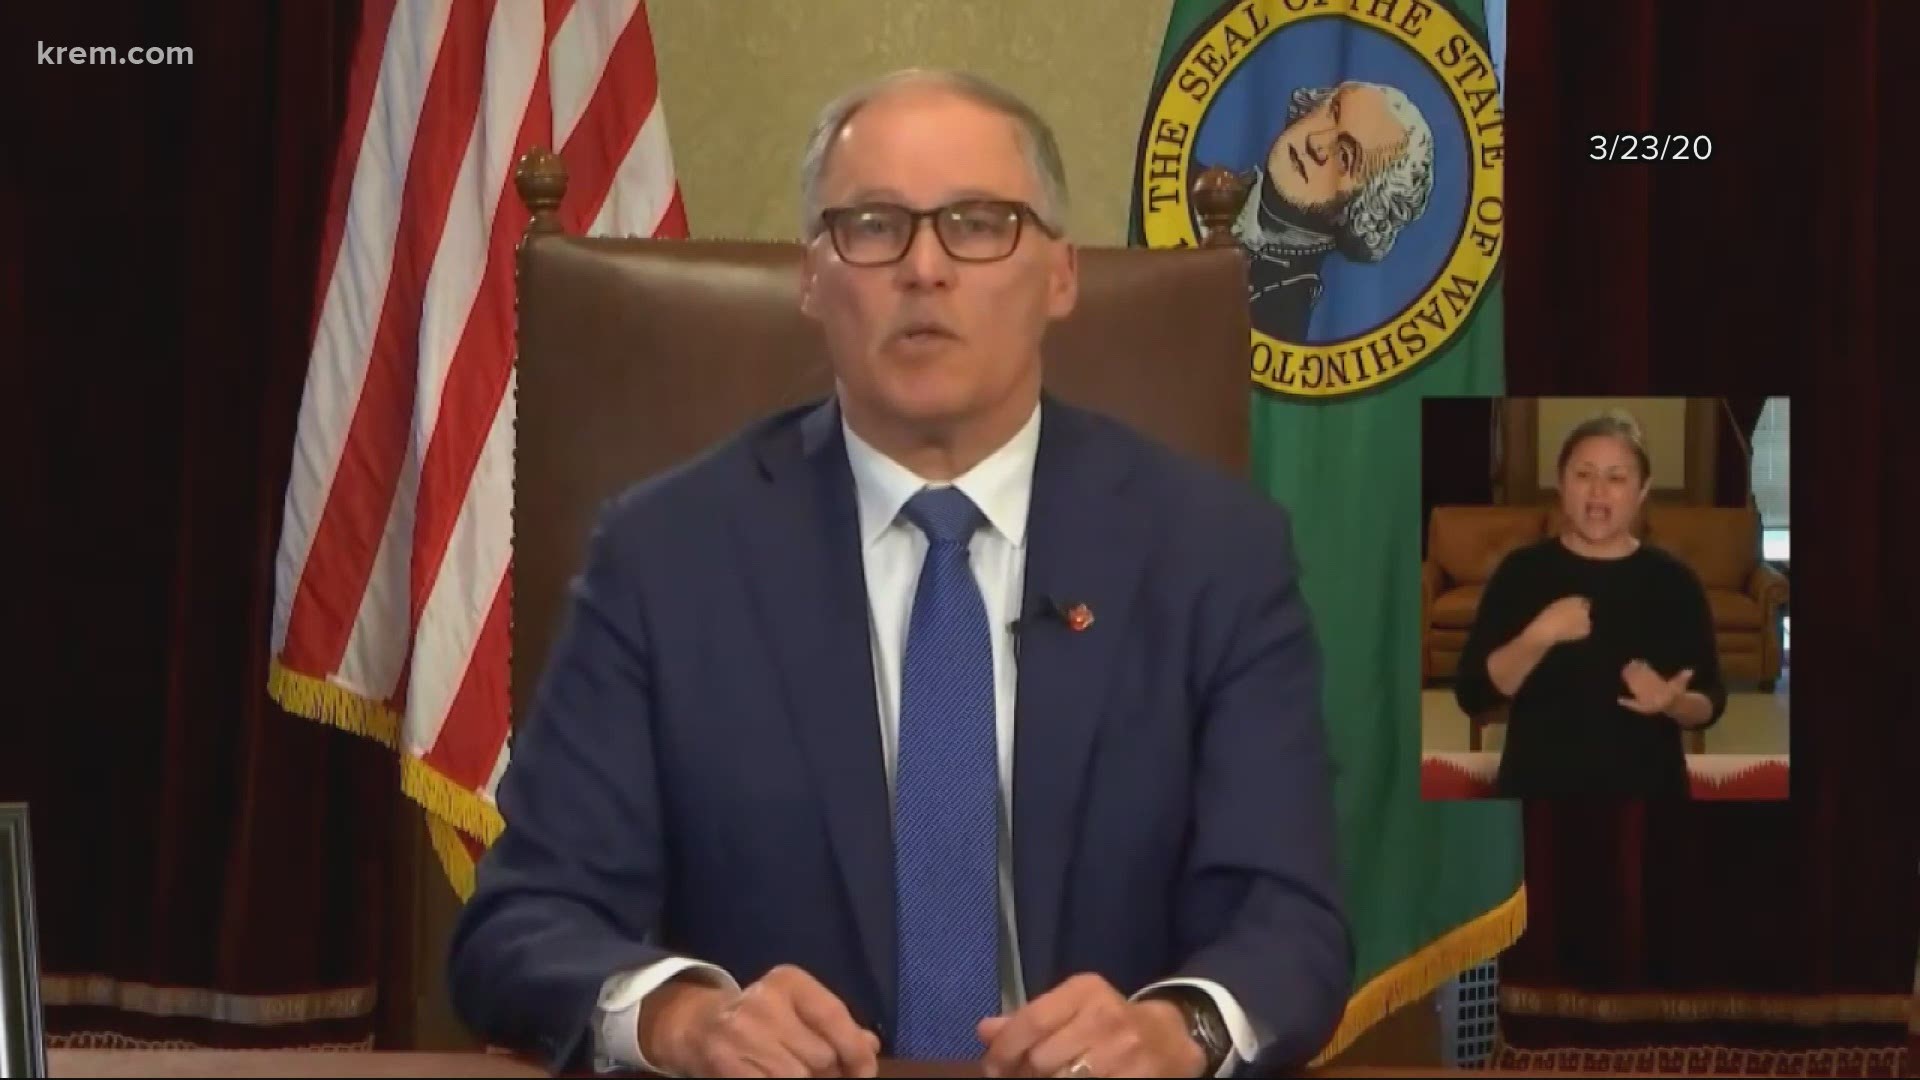 Here's a timeline of events since Gov. Inslee announced the stay-home order on March 23, 2020 and what lies ahead amid the pandemic.